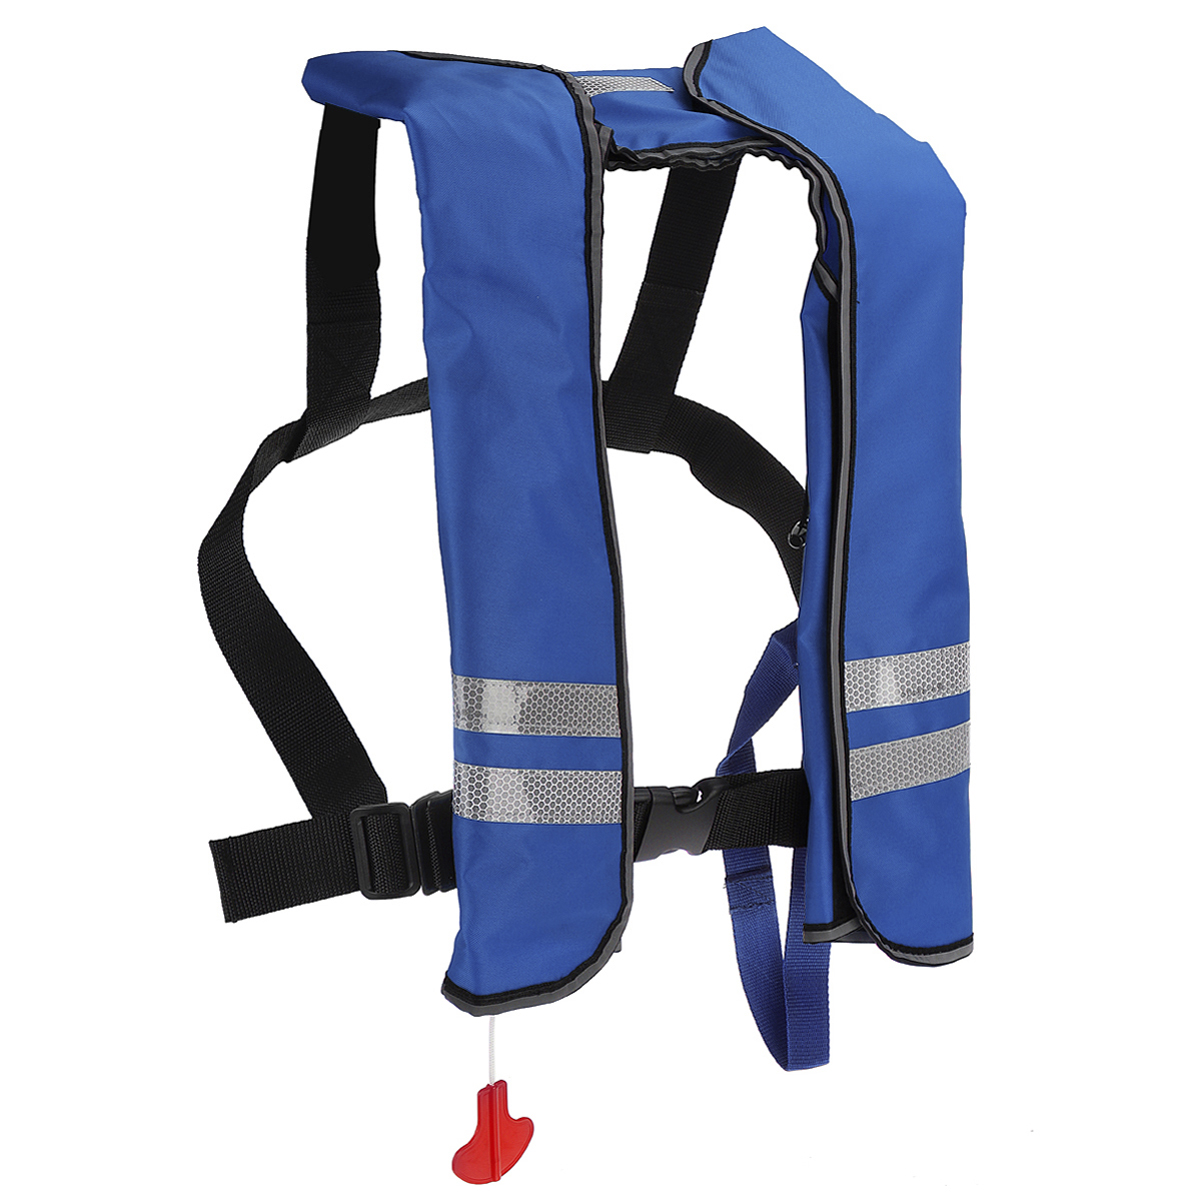 Auto Inflatable Life Jacket Pfd Adult Fishing Vest Water Swimming